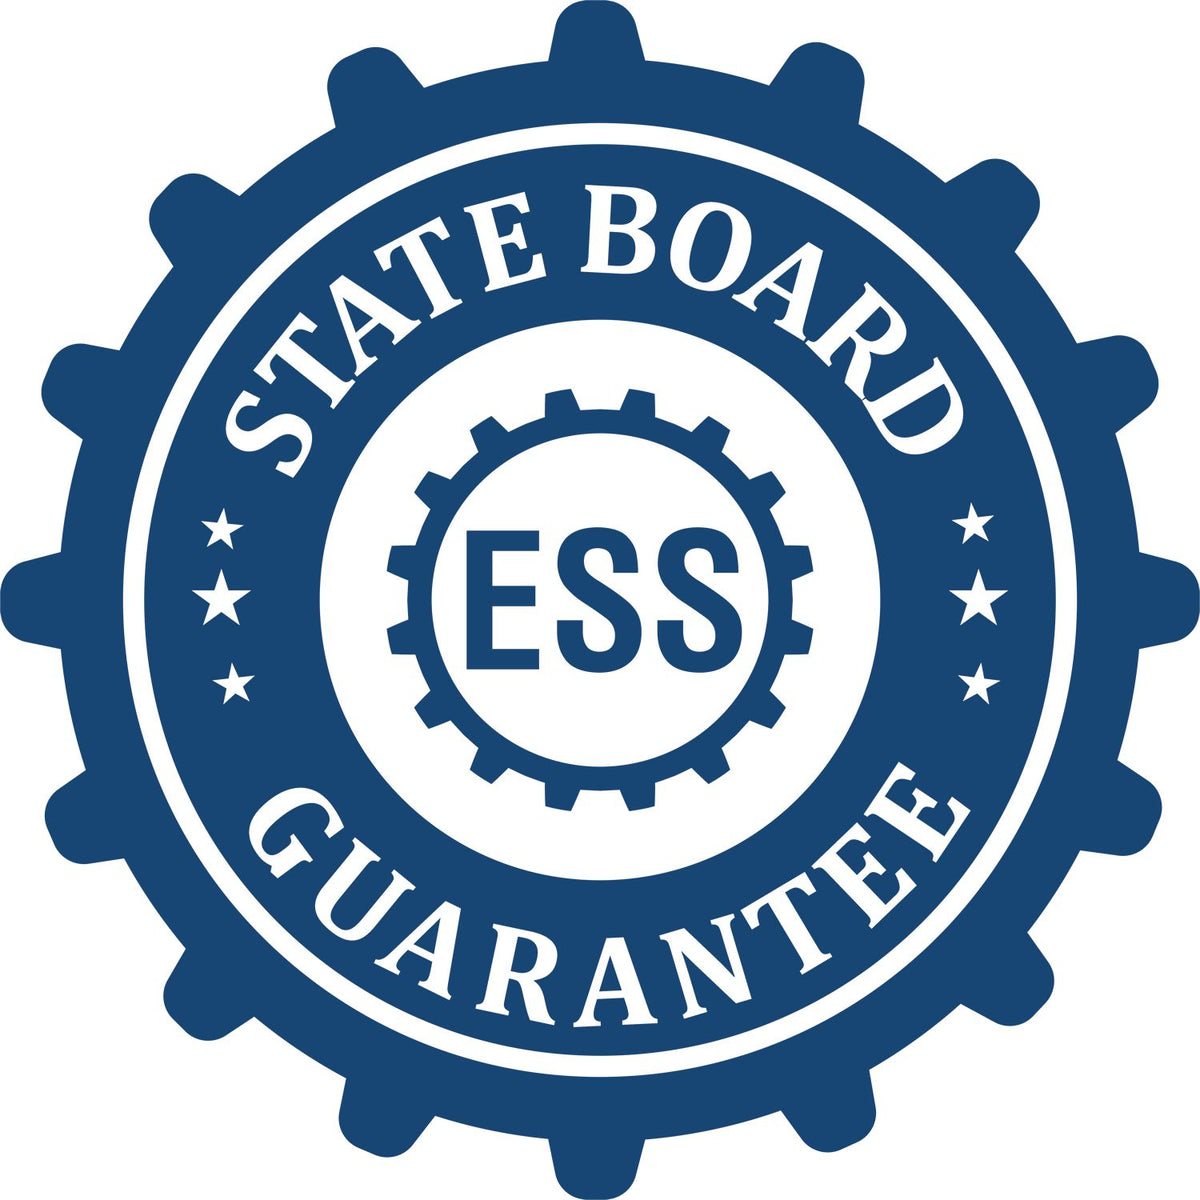 An emblem in a gear shape illustrating a state board guarantee for the Digital Guam Geologist Stamp, Electronic Seal for Guam Geologist